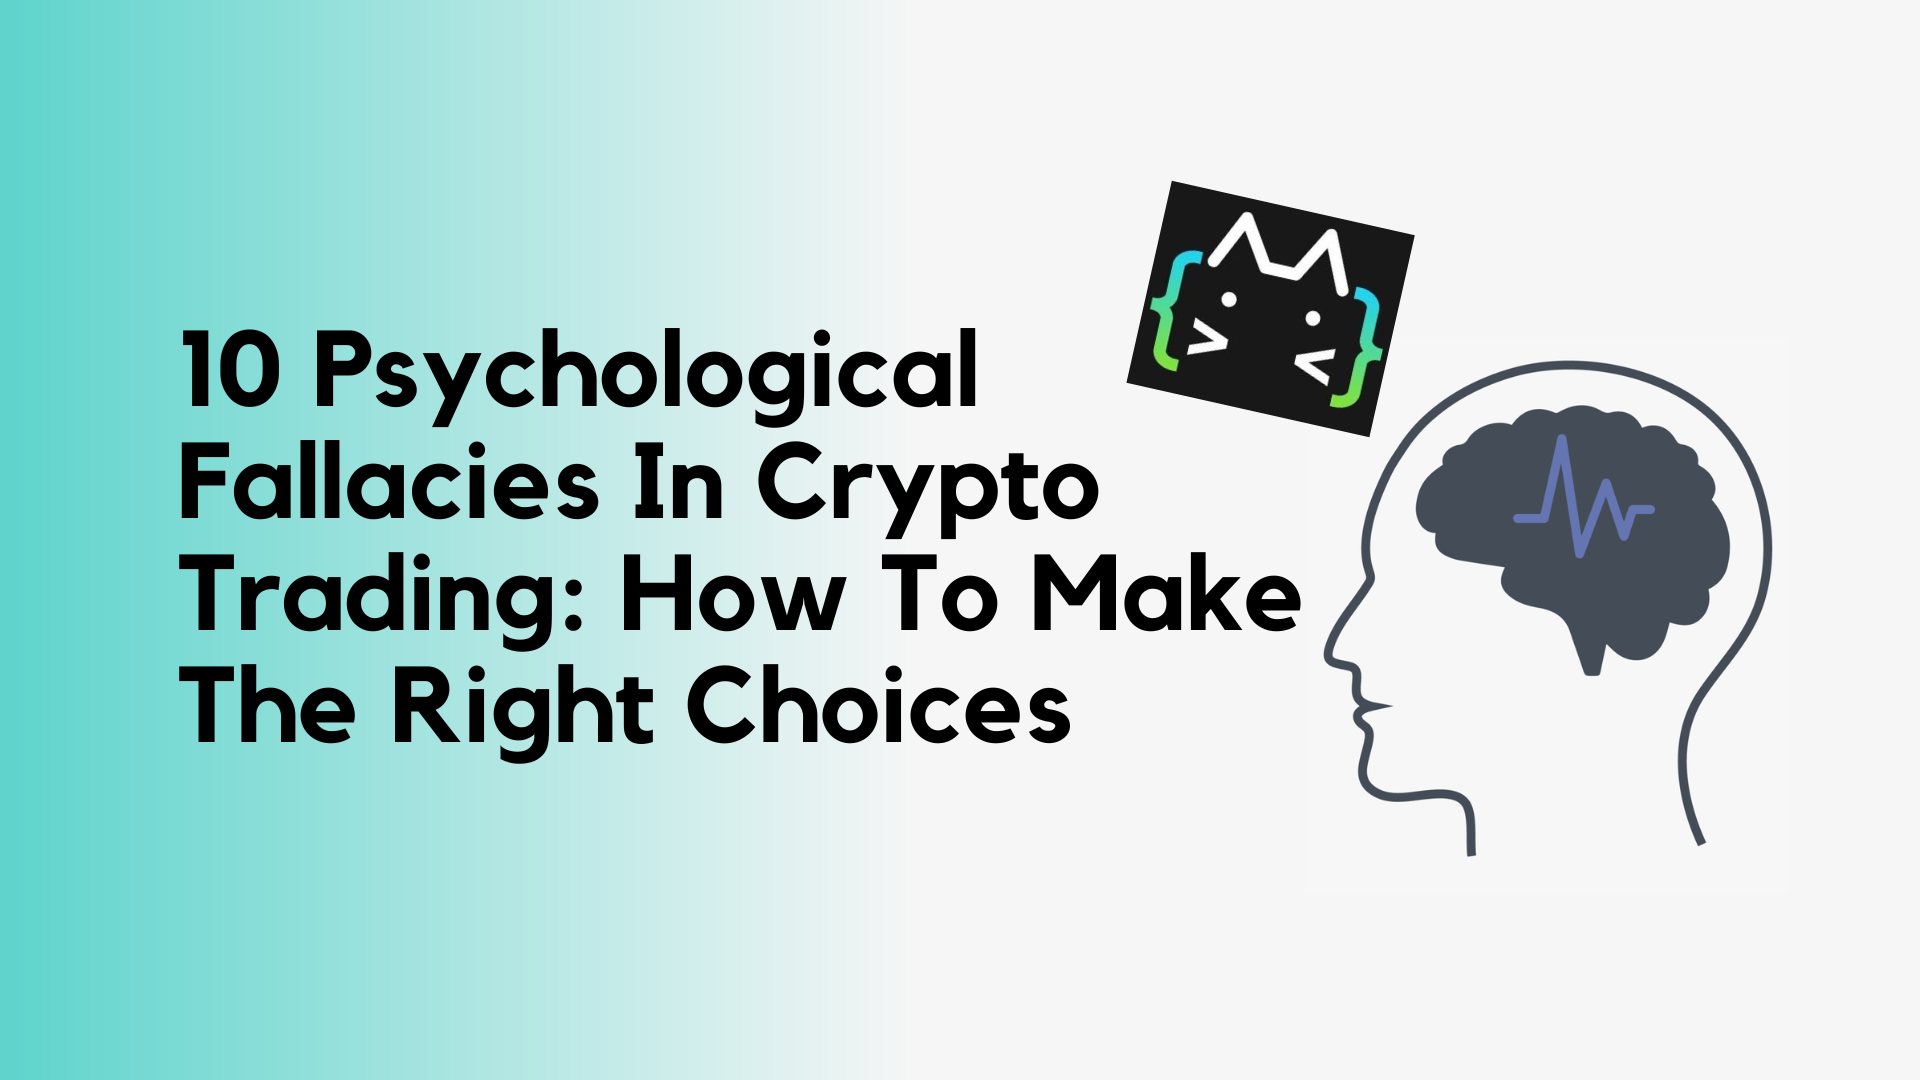 10 psychological fallacies in crypto trading: how to make the right choices